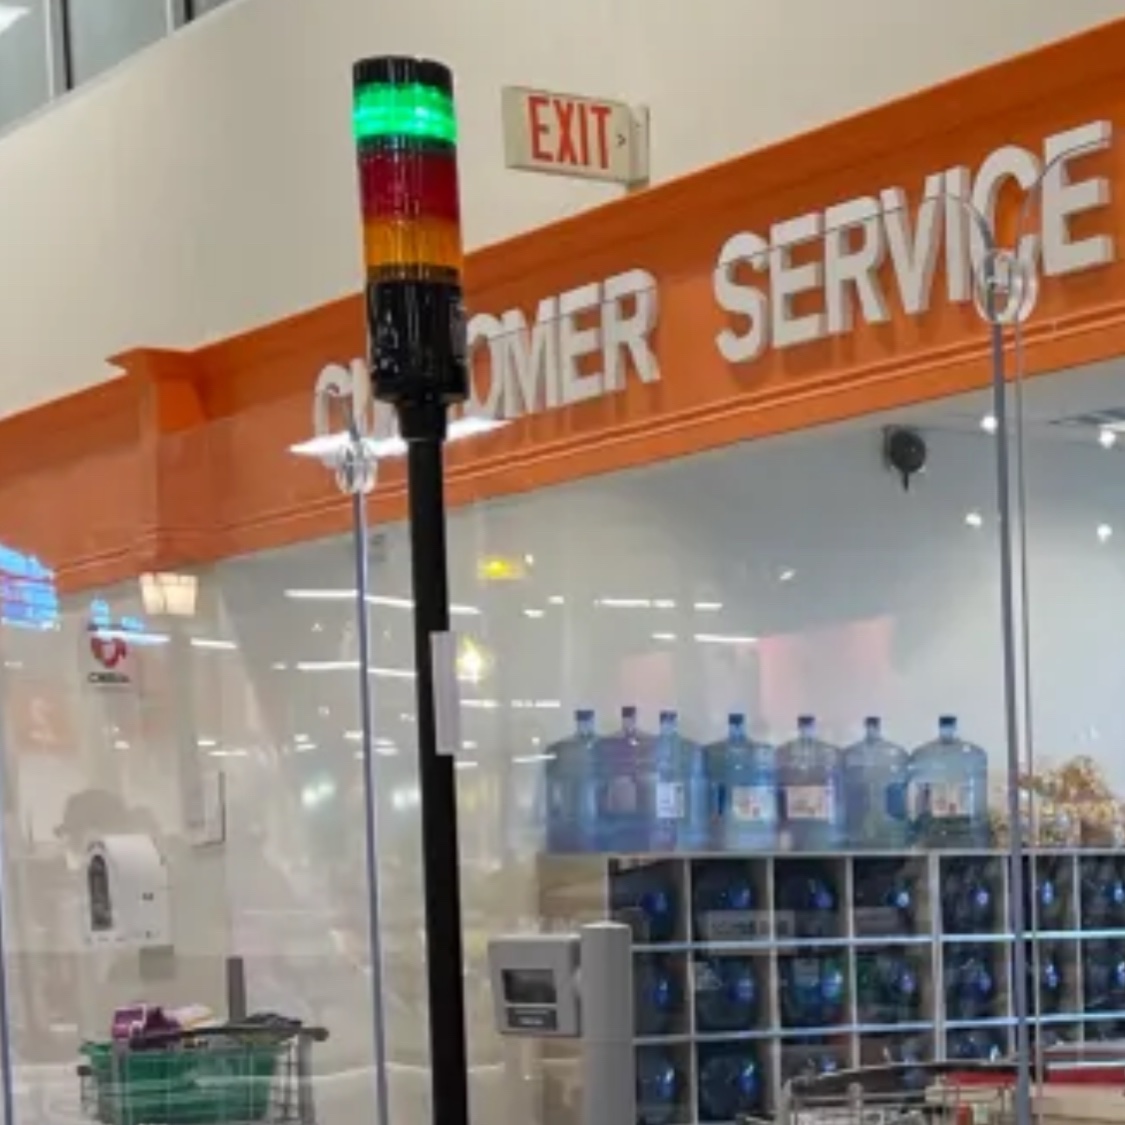 Imagine how helpless you’d feel inside a smoke-filled store as you try to get out by heading toward this glowing exit sign…only to find a wall of plexiglass holding you back. How are these barriers not illegal?